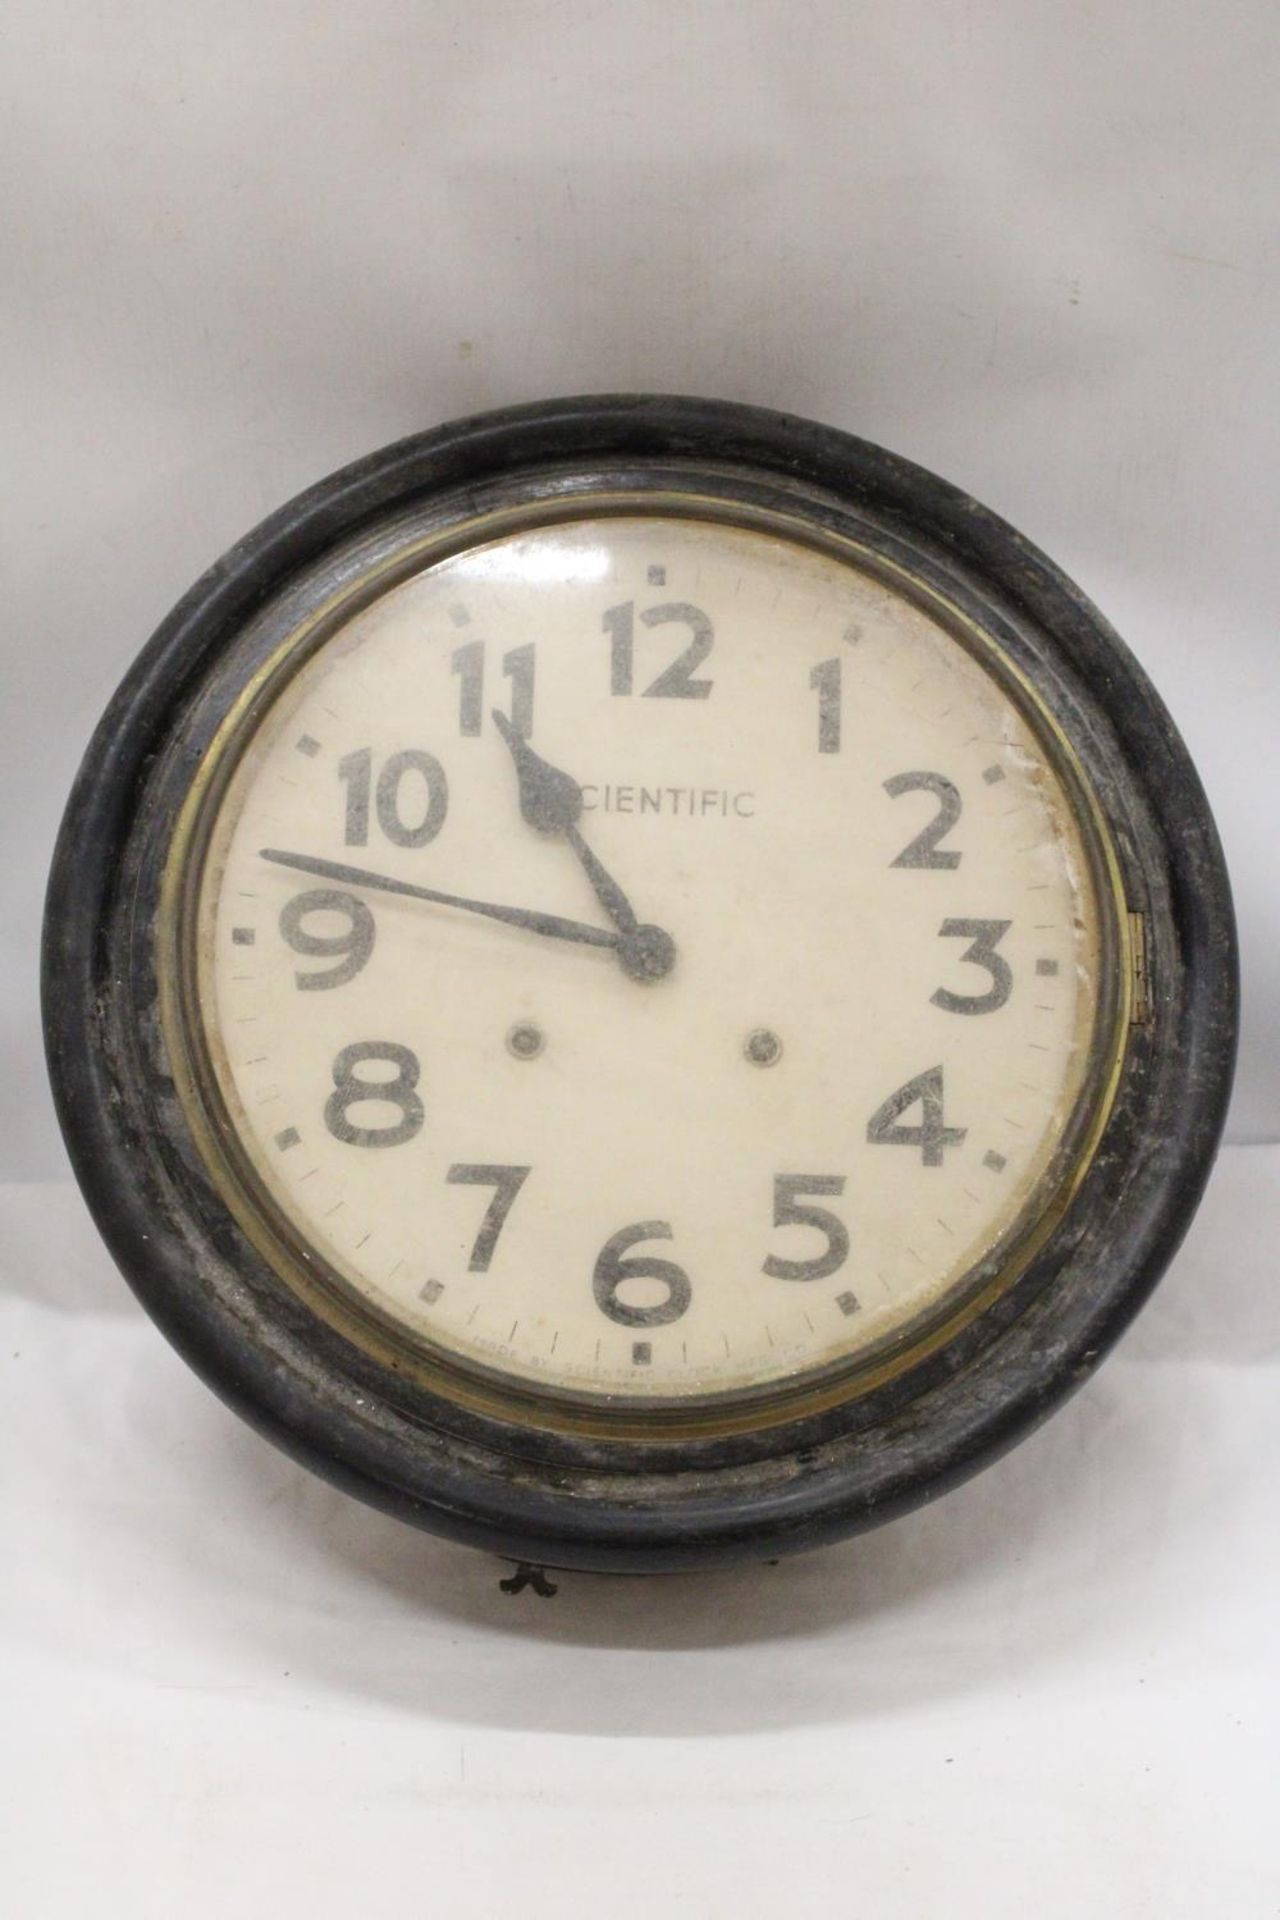 A LARGE VINTAGE WOODEN CASED WALL CLOCK MARKED 'SCIENTIFIC', DIAMETER 40CM